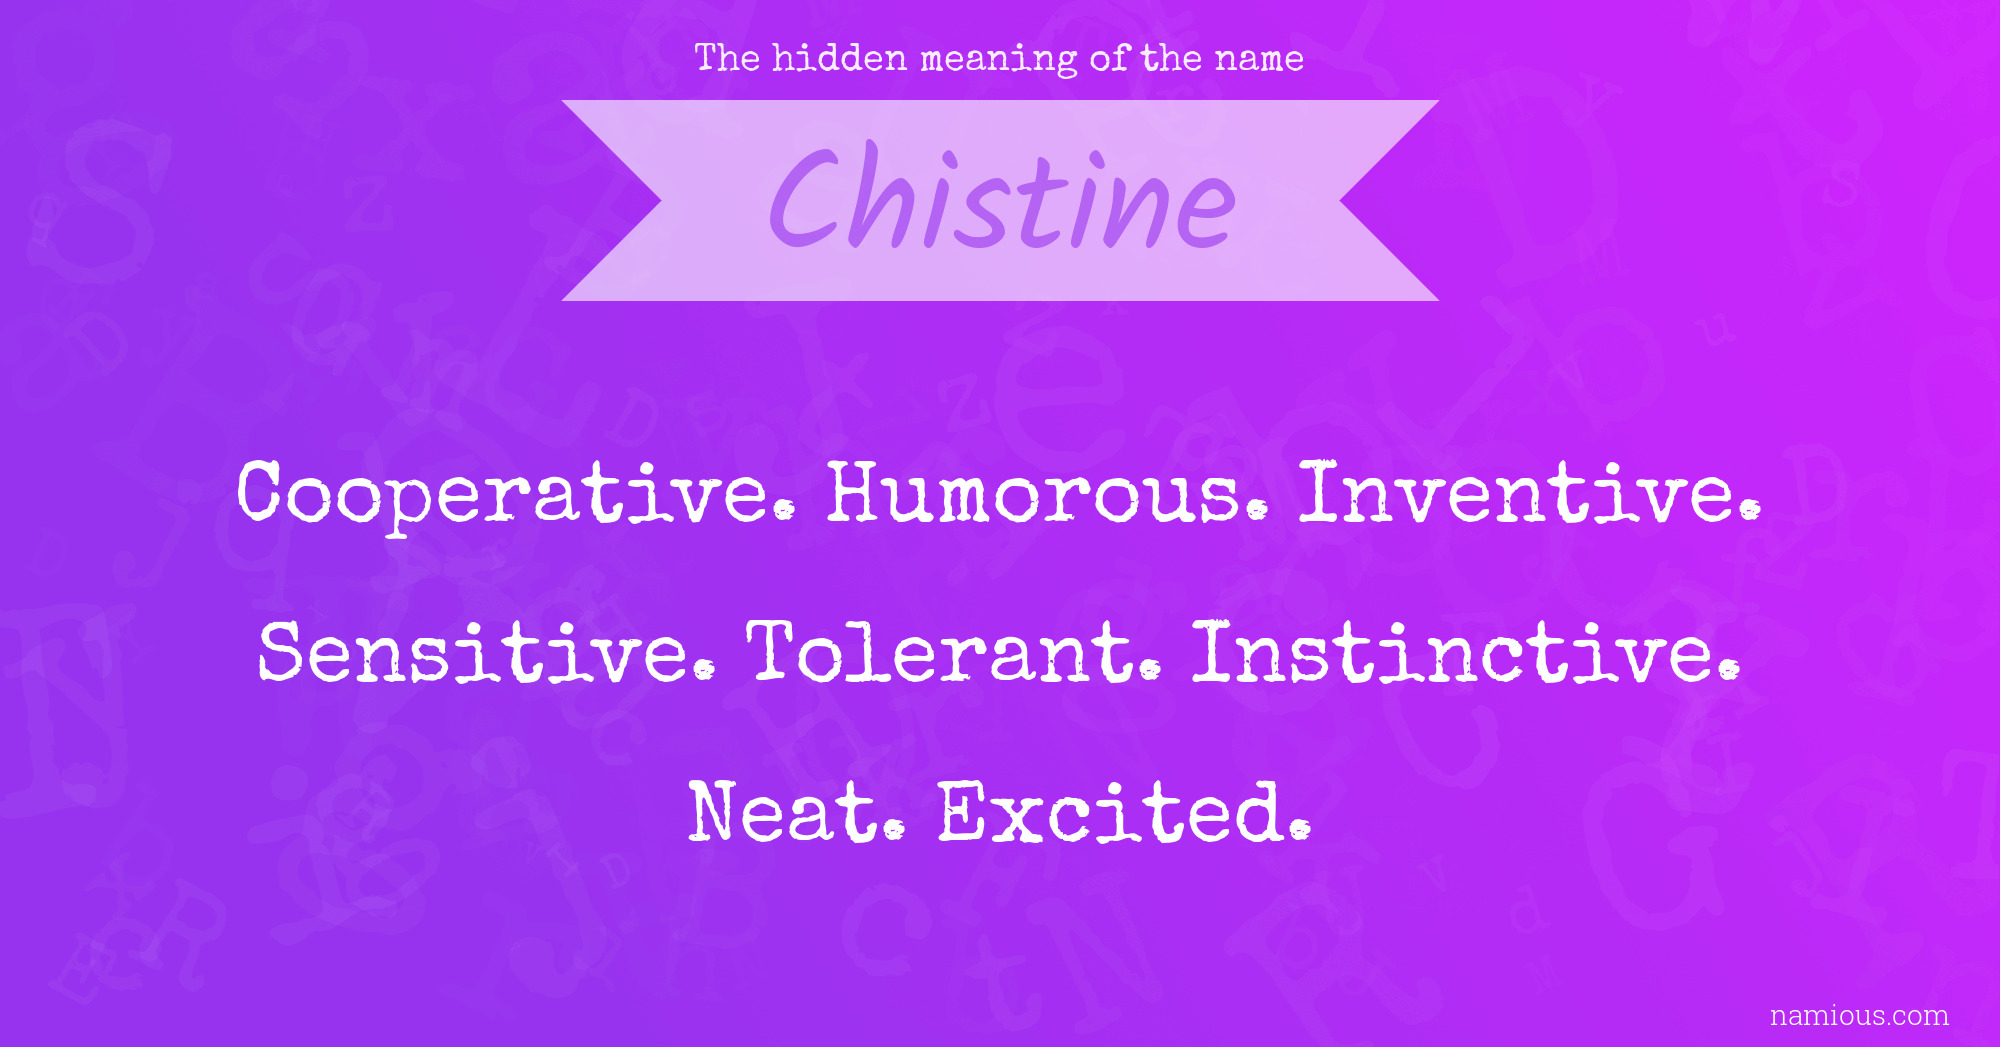 The hidden meaning of the name Chistine